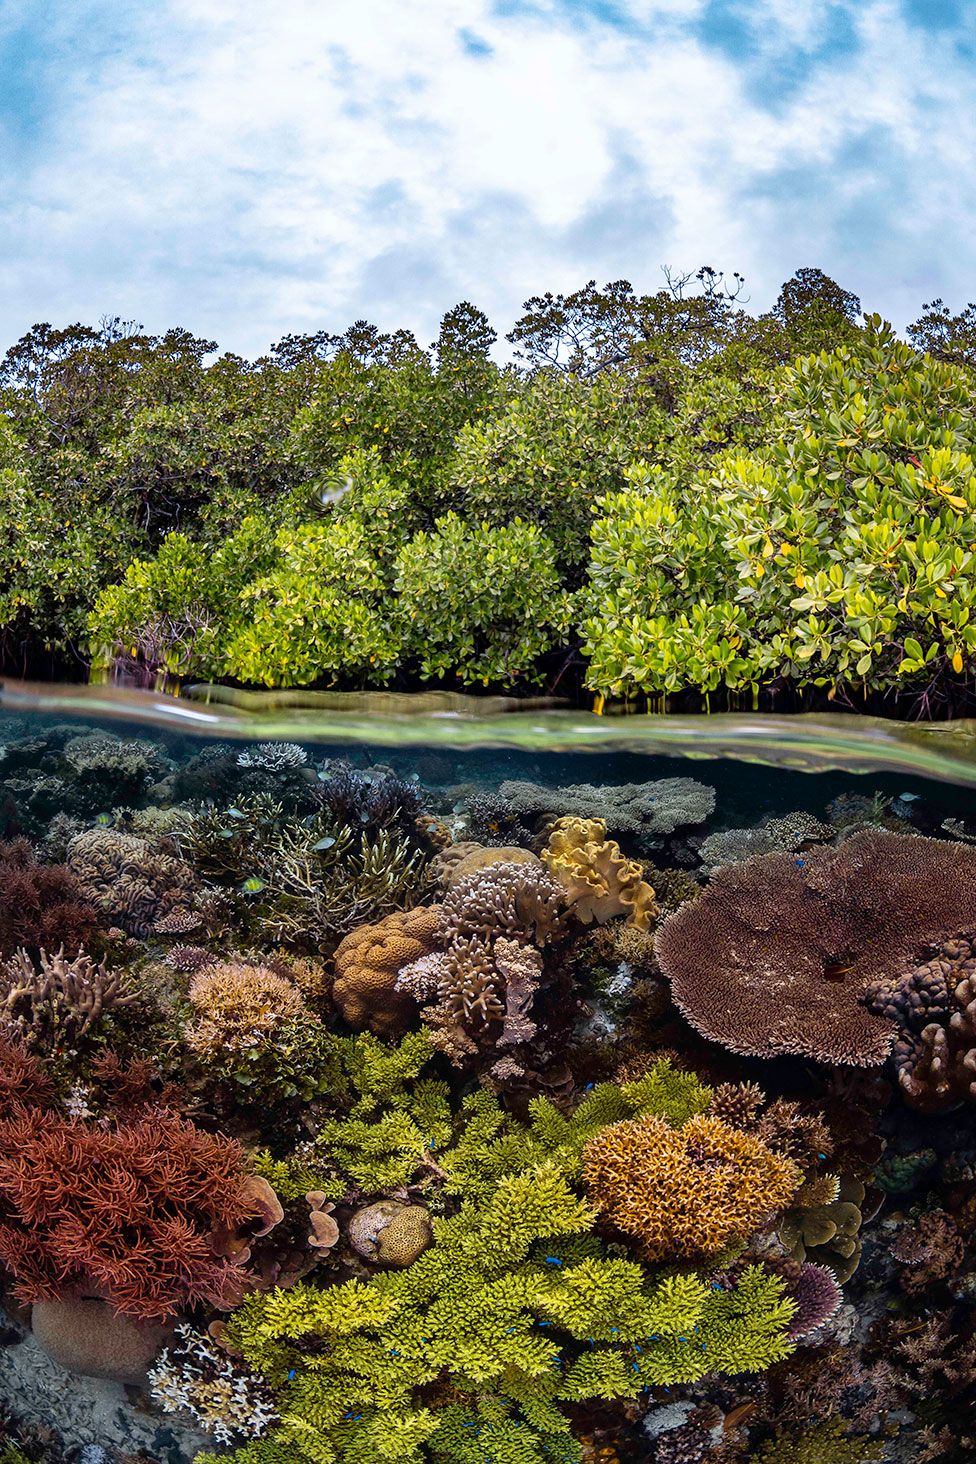 A mangrove forest grows atop a vibrant coral reef on Raja Ampat's Gam island, Indonesia